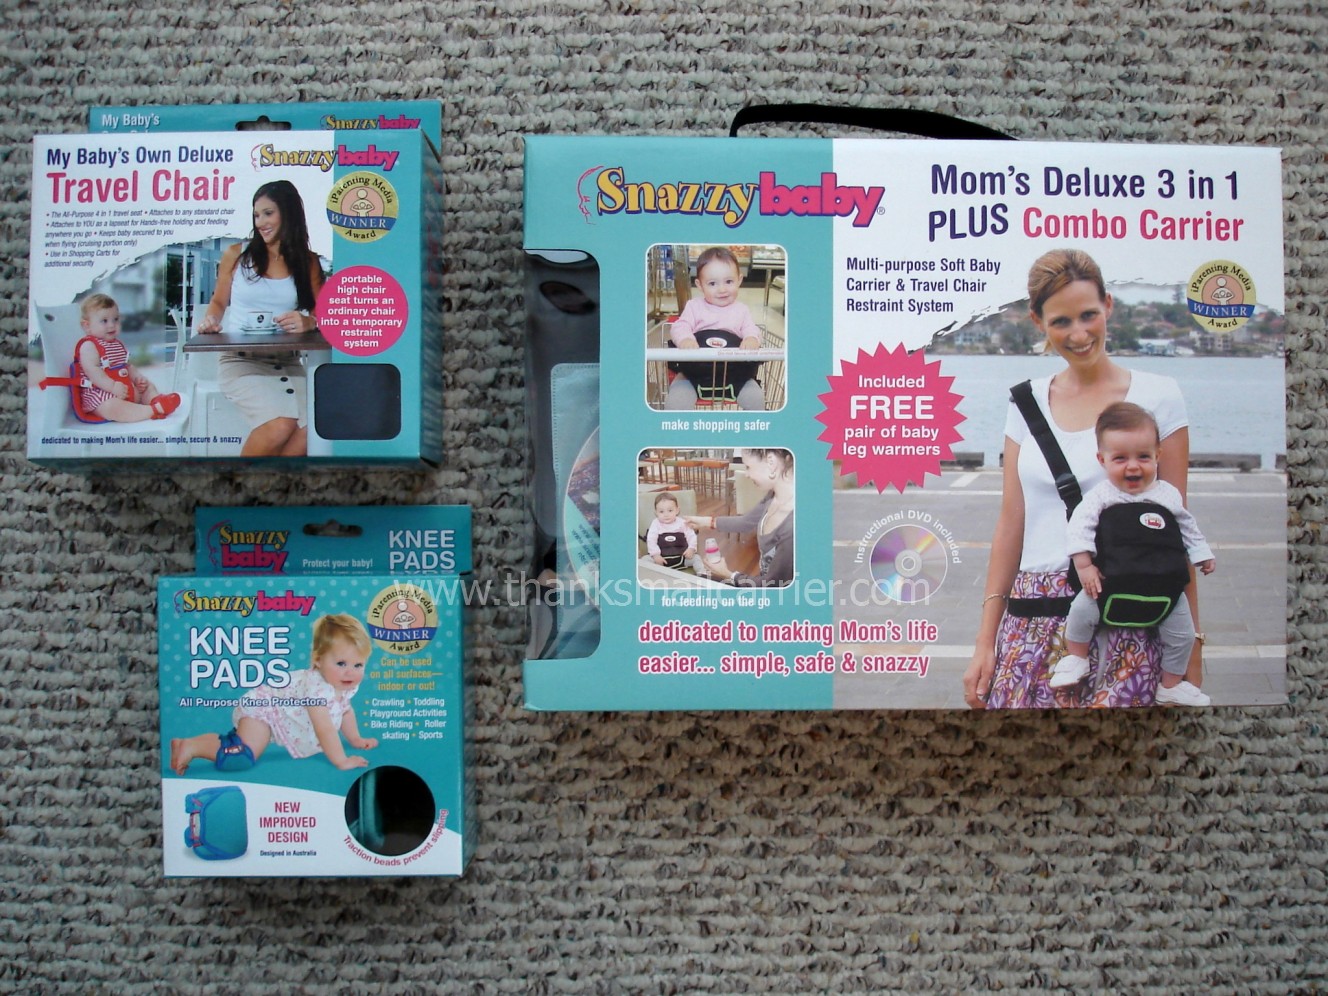 Snazzy Baby Kneepads, Travel Chair and Deluxe Combo Carrier – Click to see the Travel Chair in our store